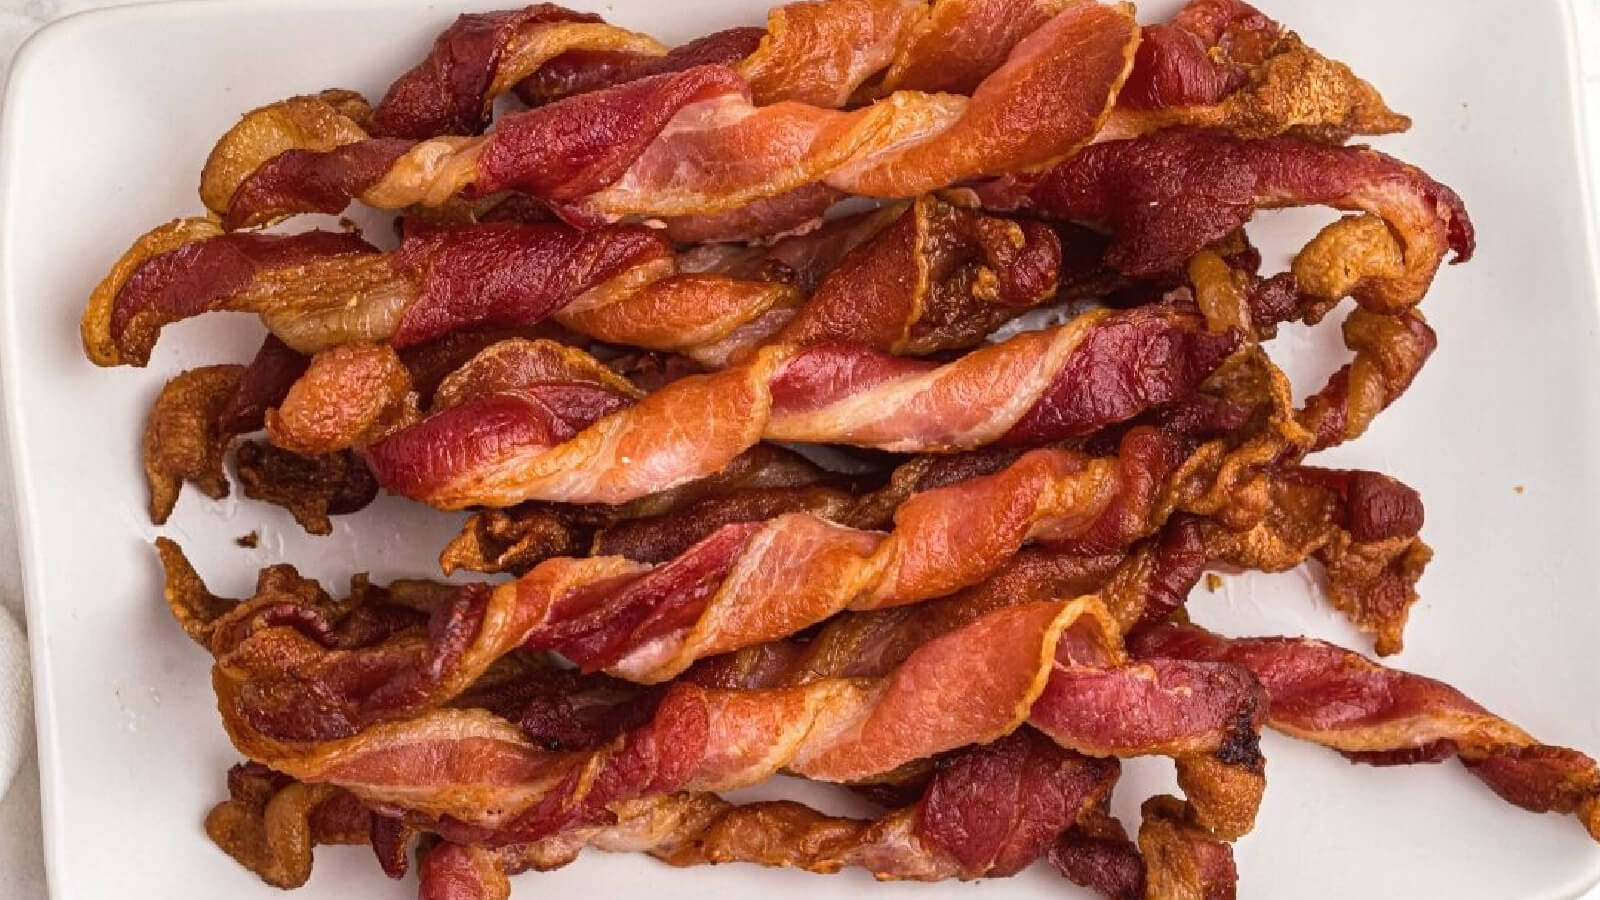 twisted bacon air fried, then served on a plate.